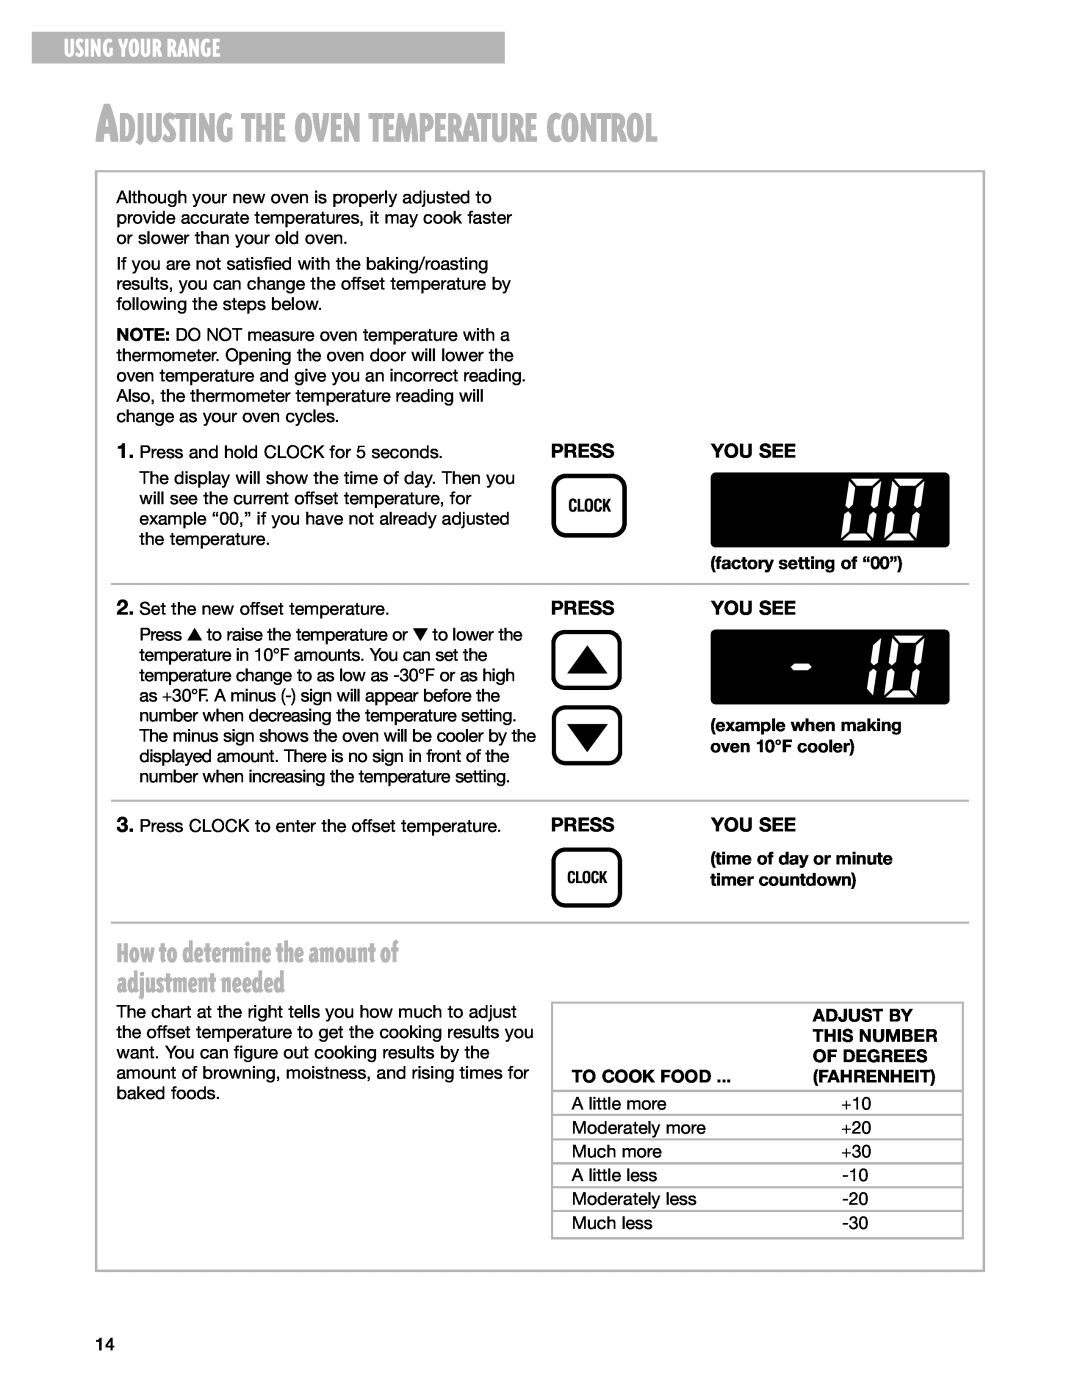 Whirlpool SF362BEG warranty Adjusting The Oven Temperature Control, Using Your Range, Press, You See 